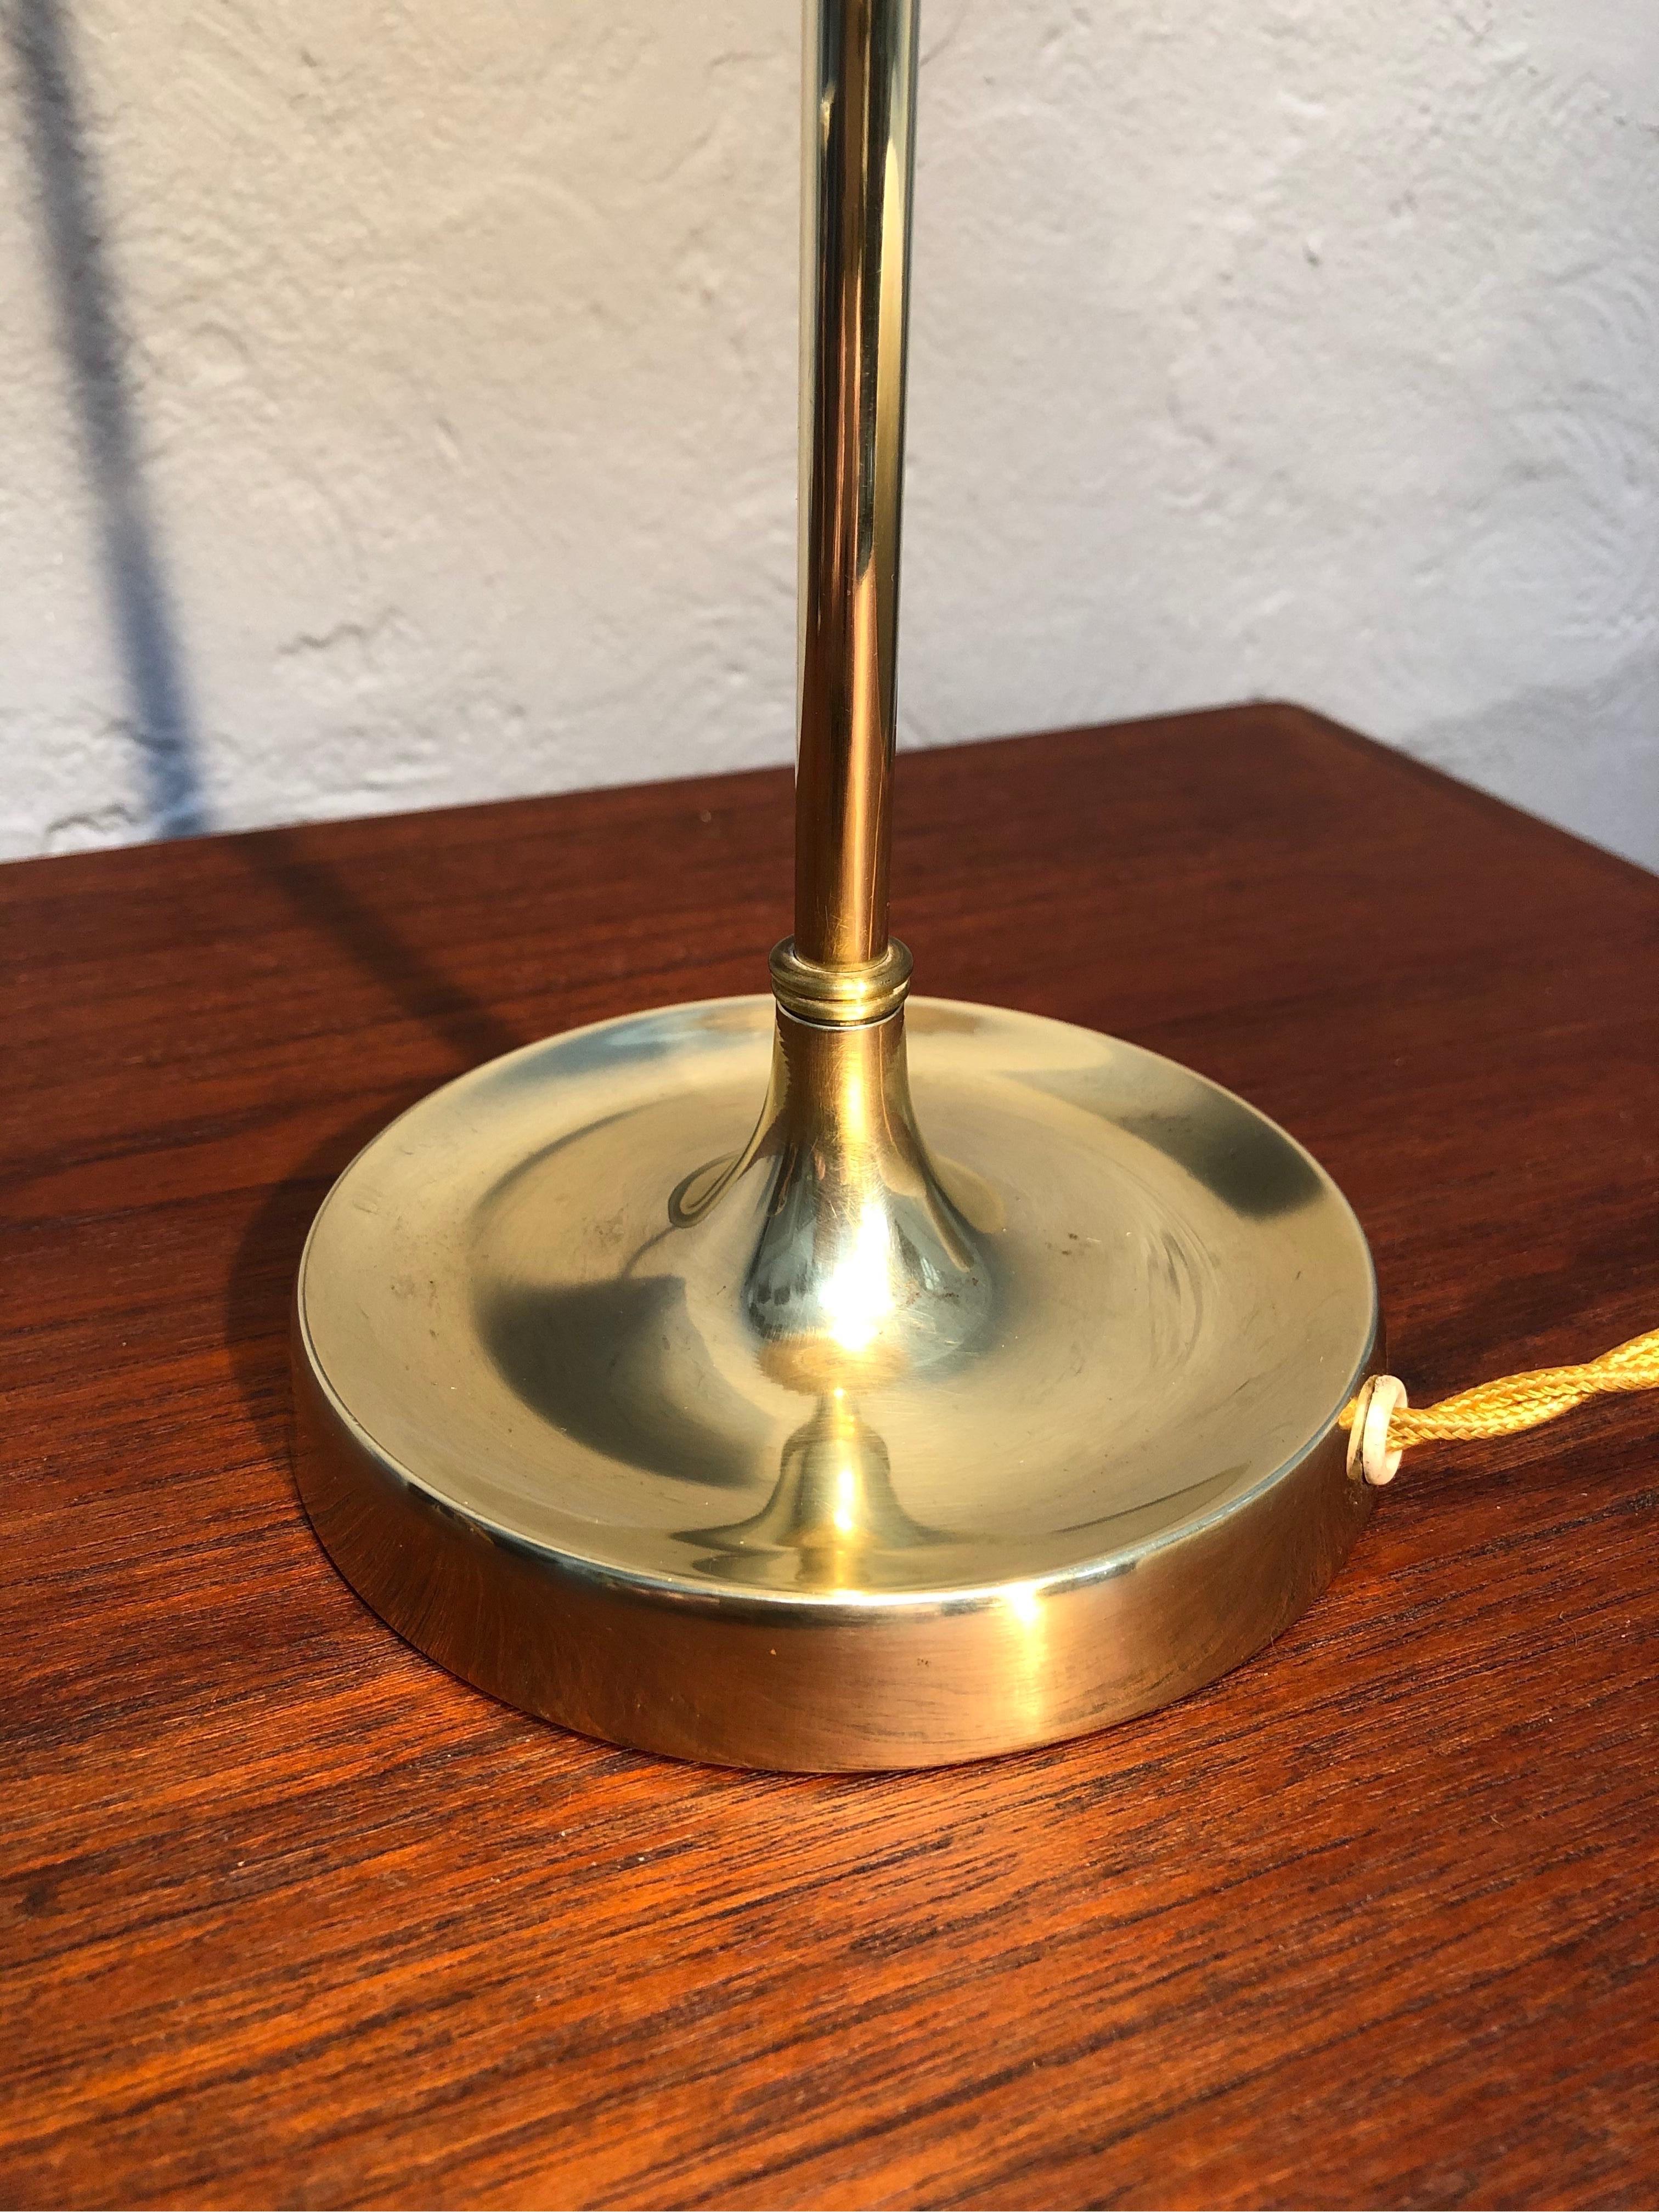 Vintage Pair of Brass Table Lamps by Esben Klint for Le Klint from the 1950s 5